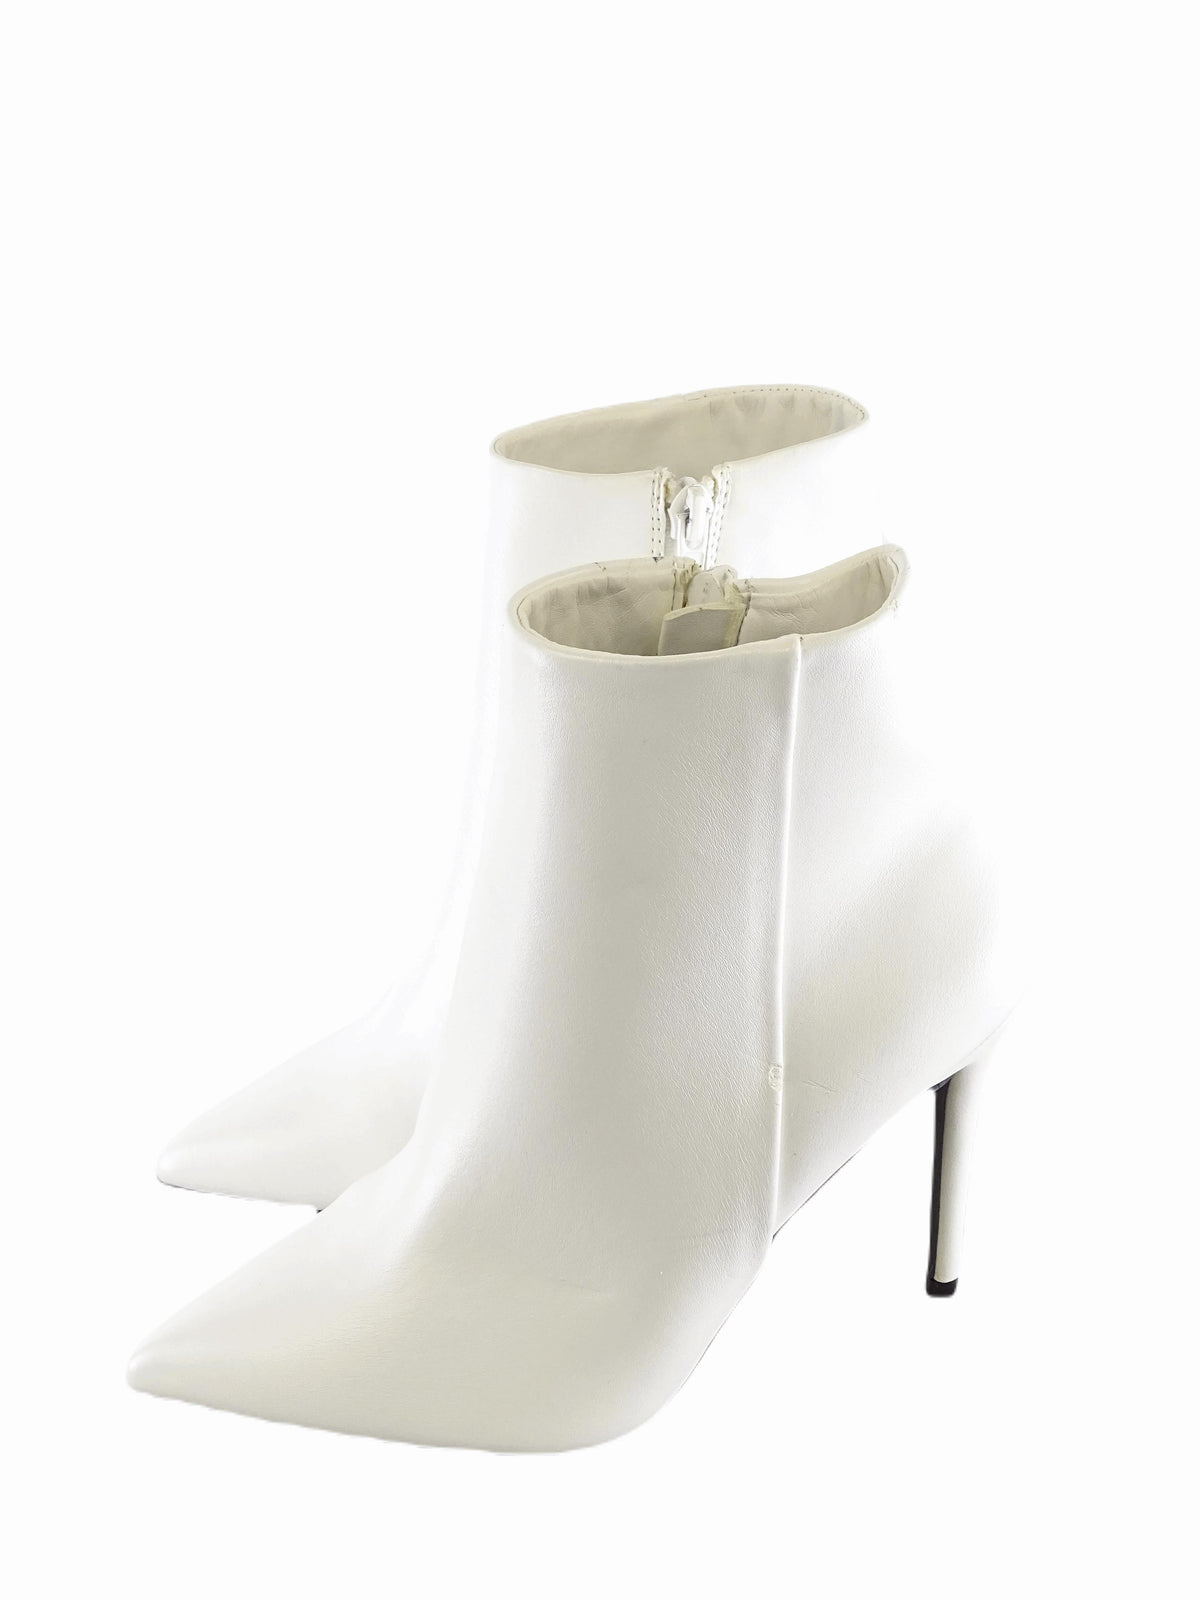 Betts White Boots 7